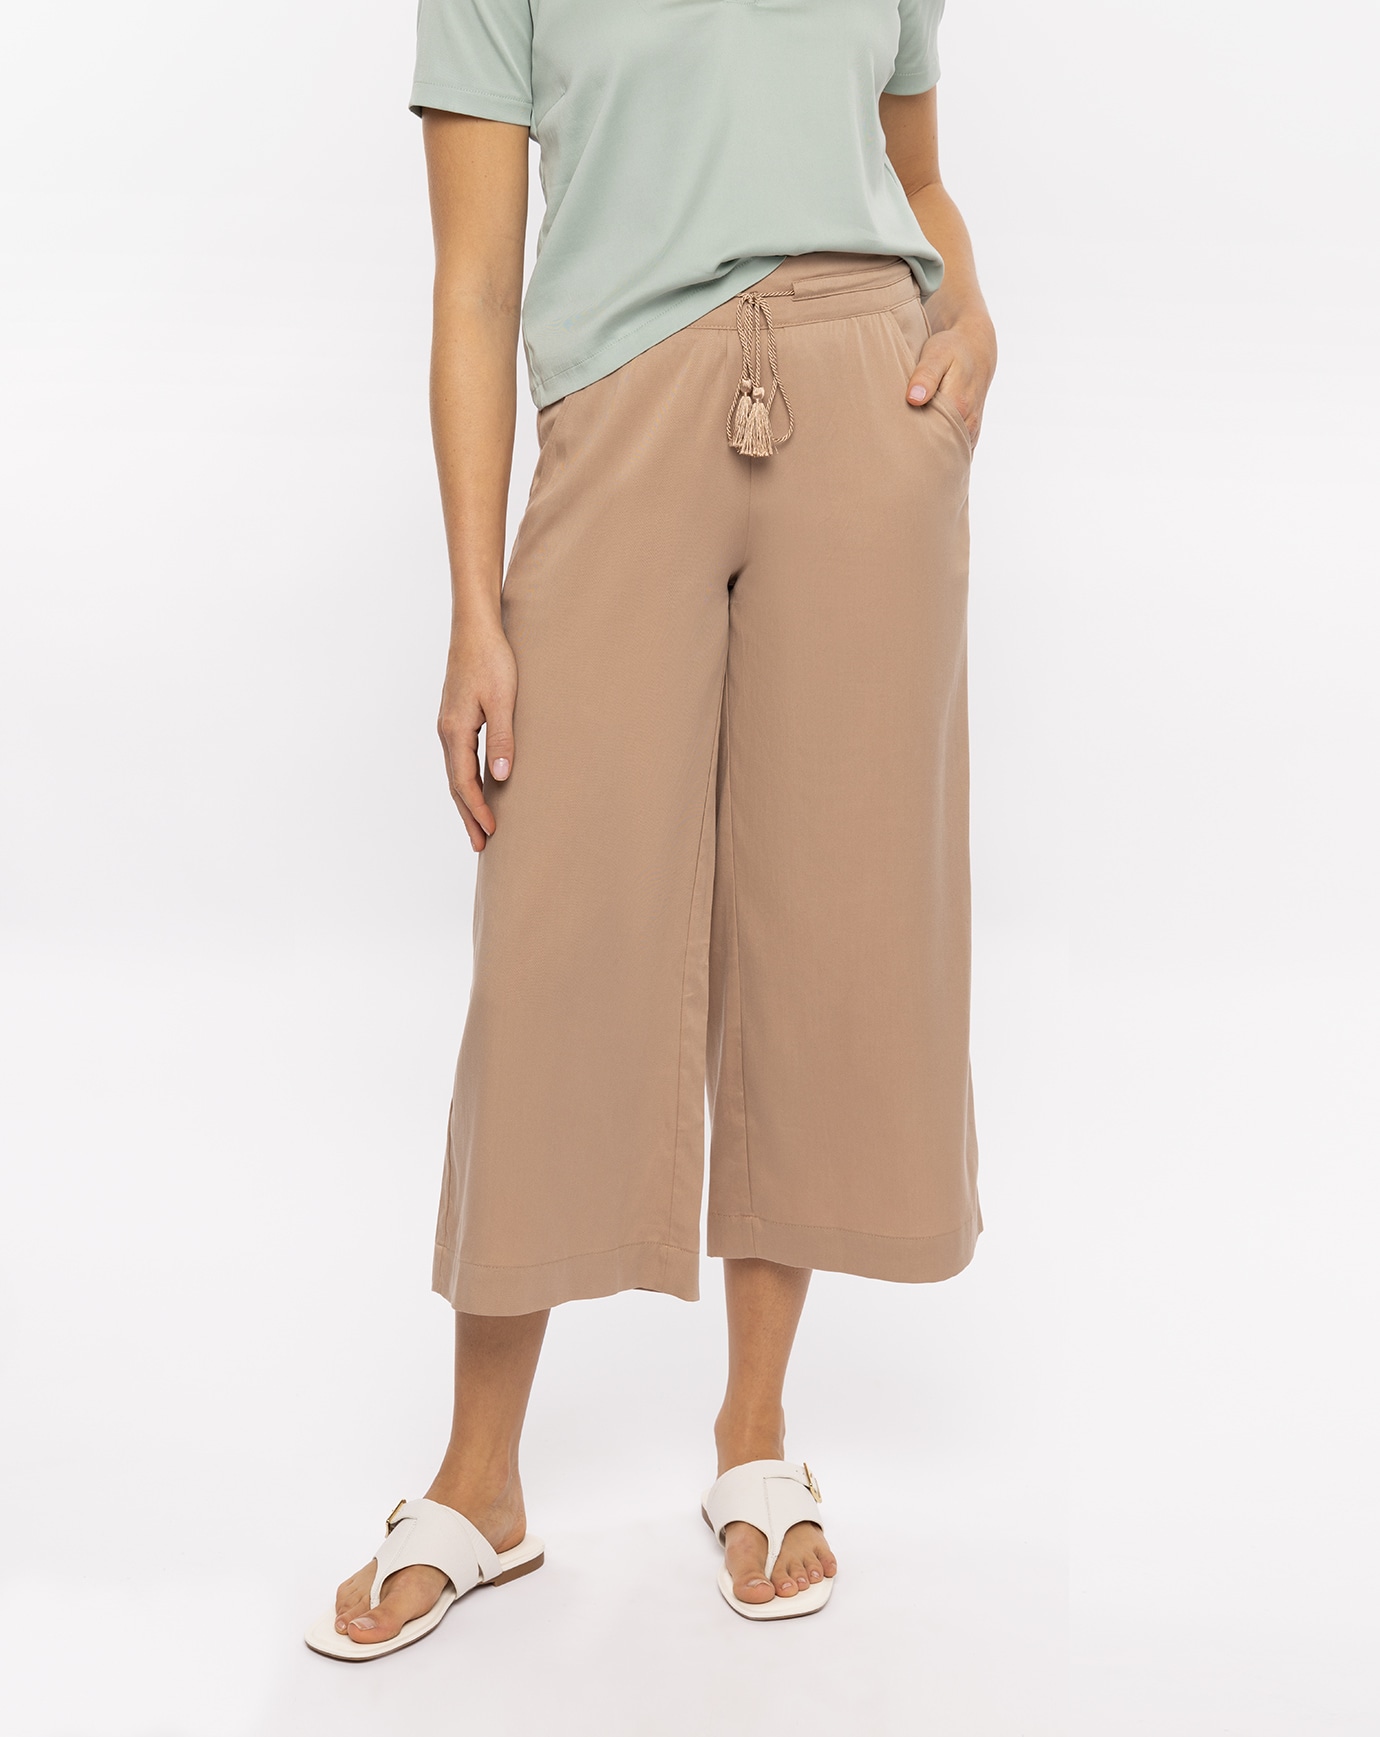 Related Product - CAPRI TIE FRONT PANT